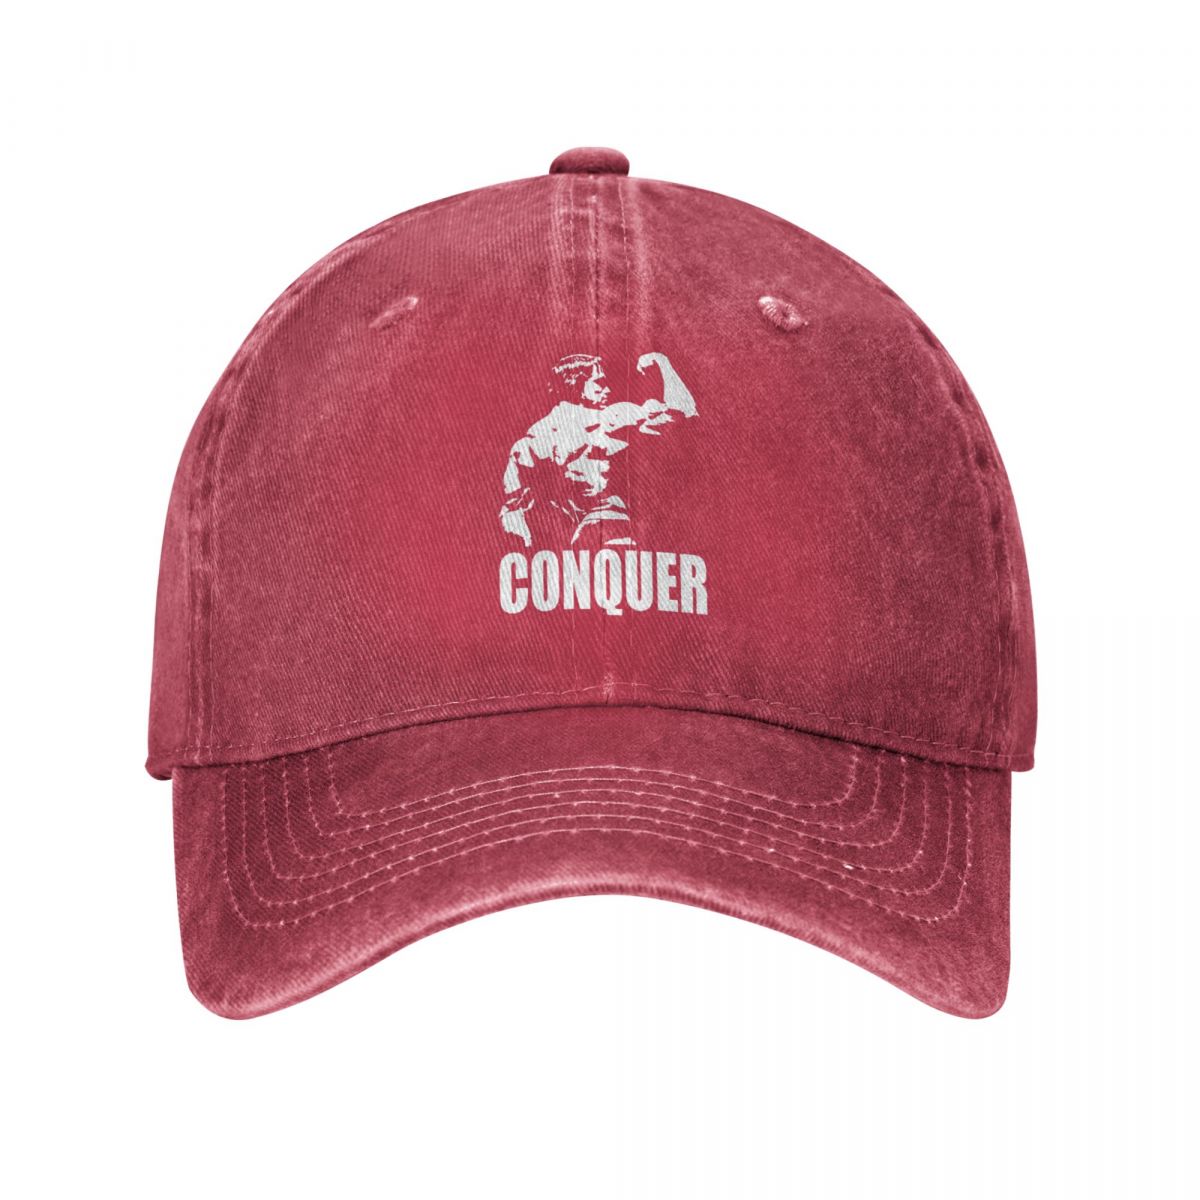 Conquer Arnold Schwarzenegger - Snapback Baseball Cap - Summer Hat For Men and Women-Red-One Size-